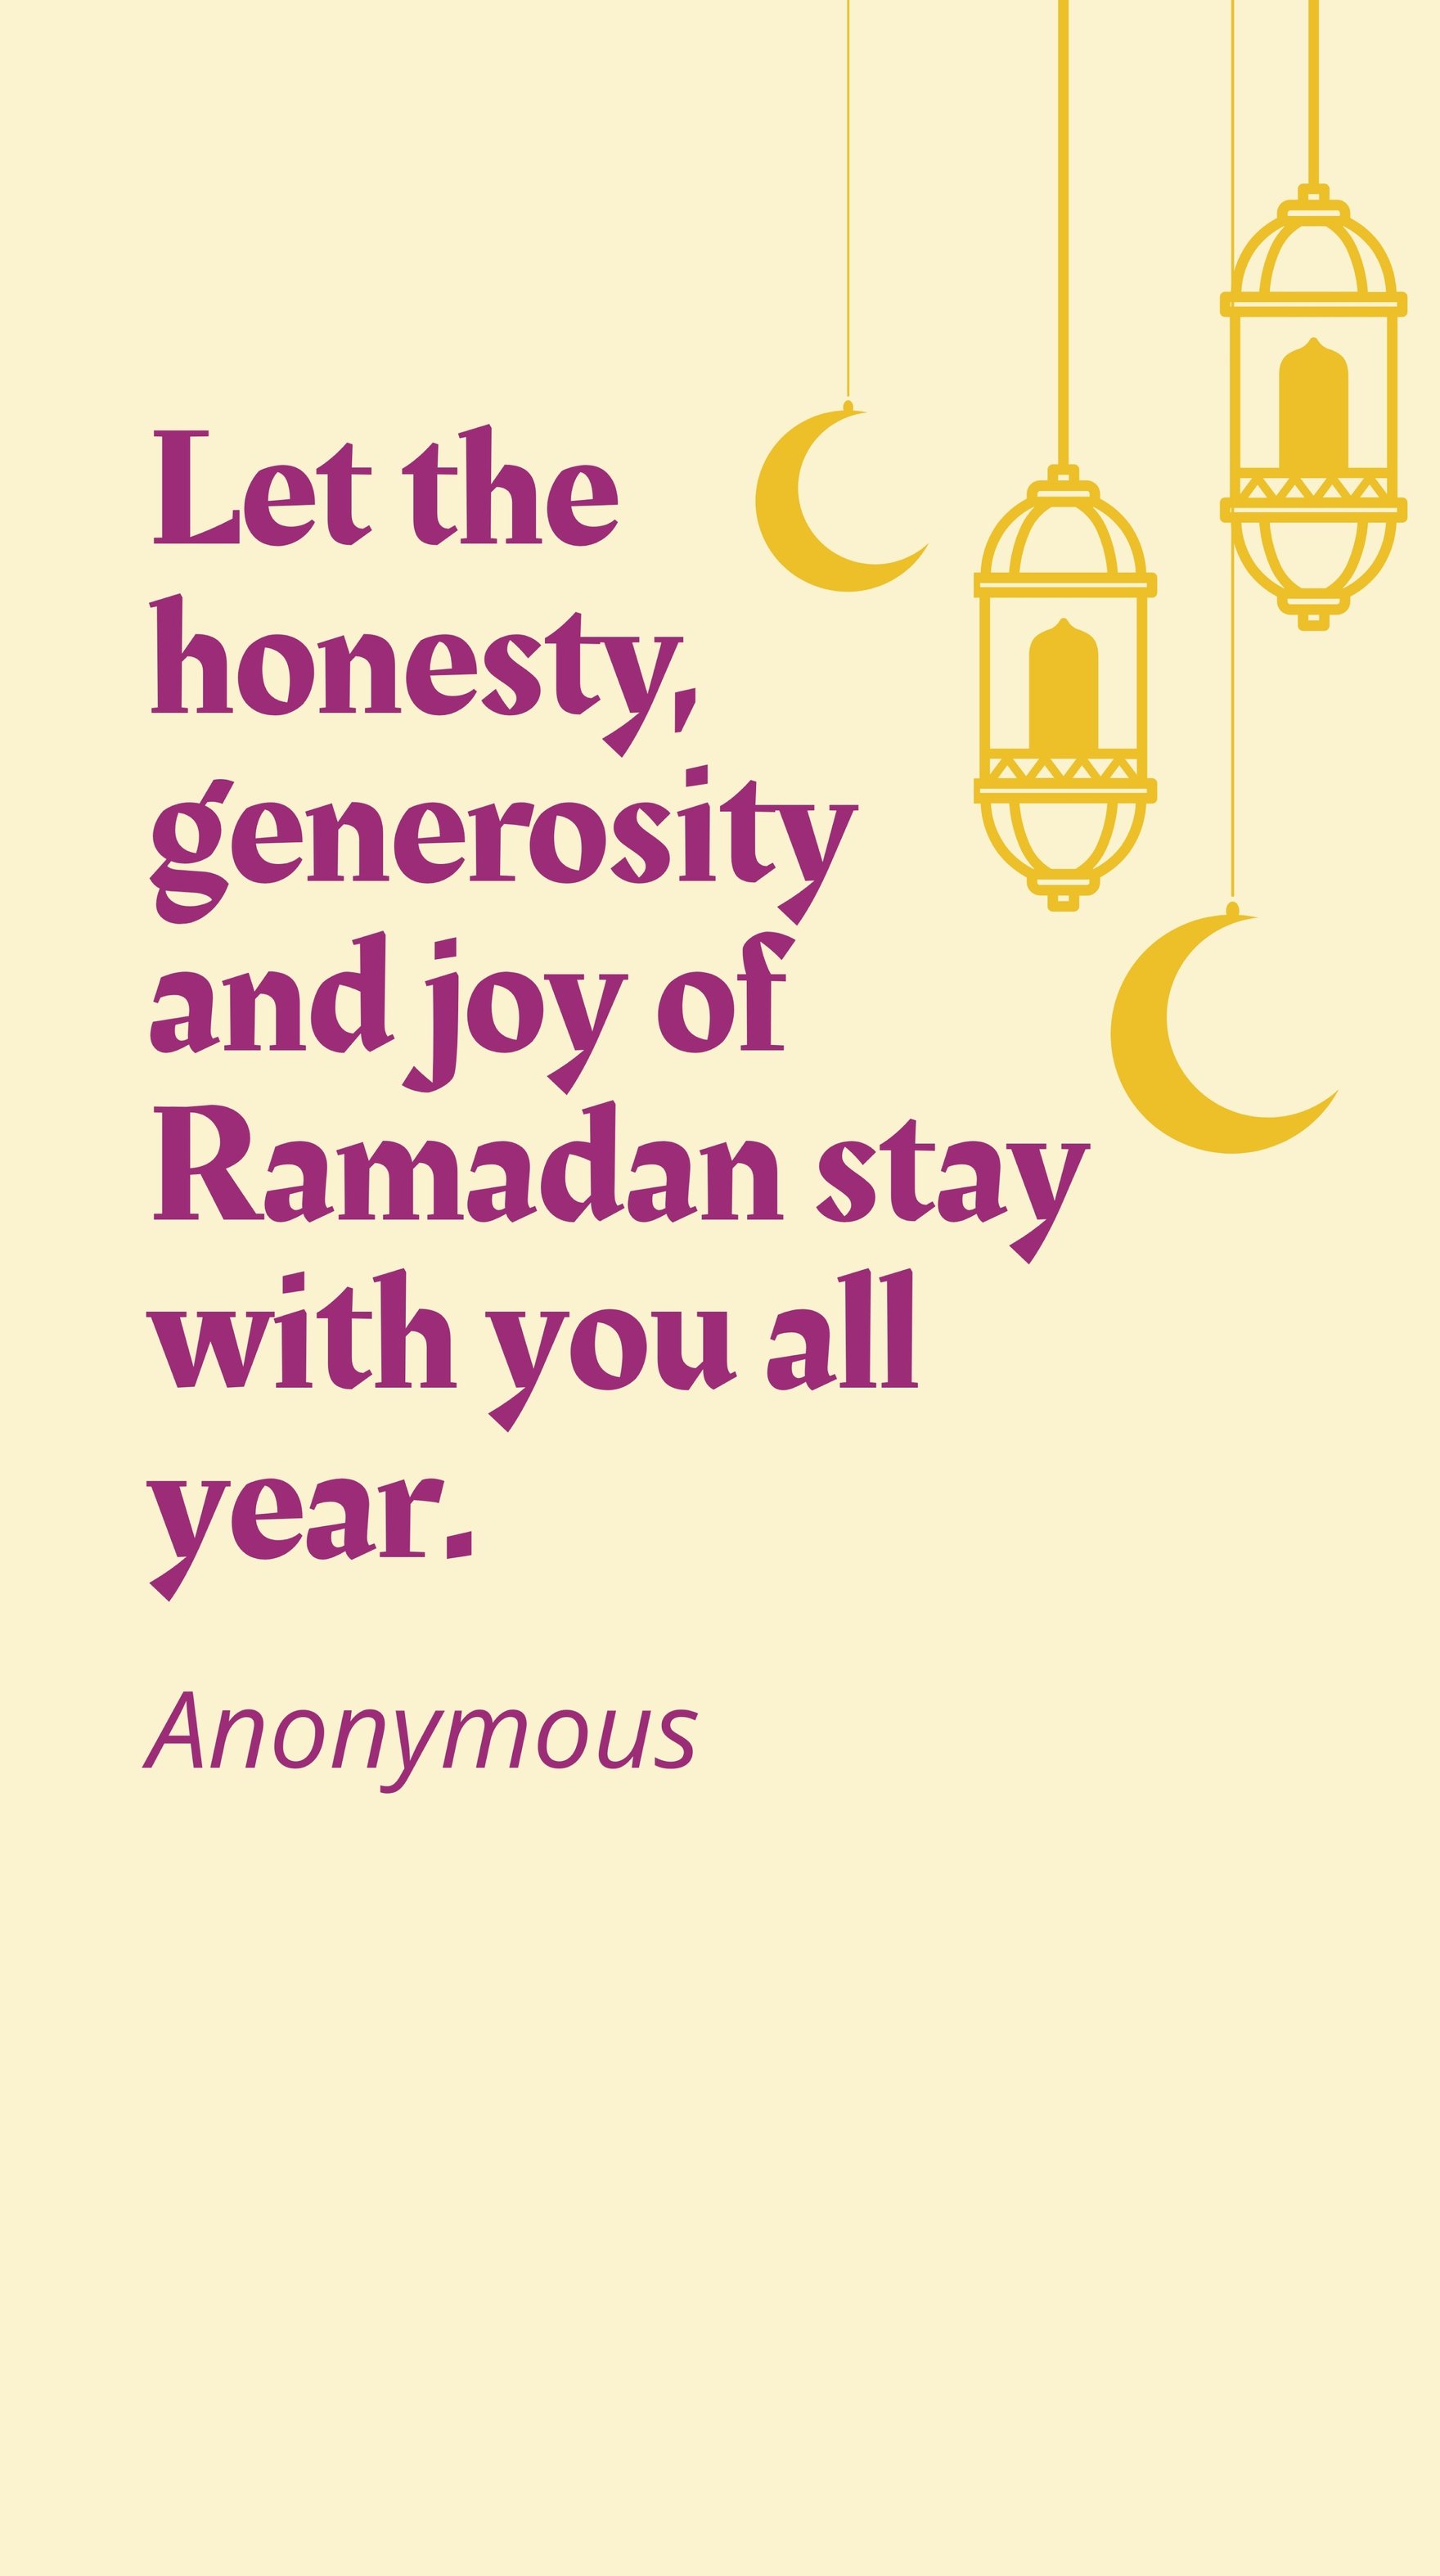 Free Anonymous - Let the honesty, generosity and joy of Ramadan stay with you all year.